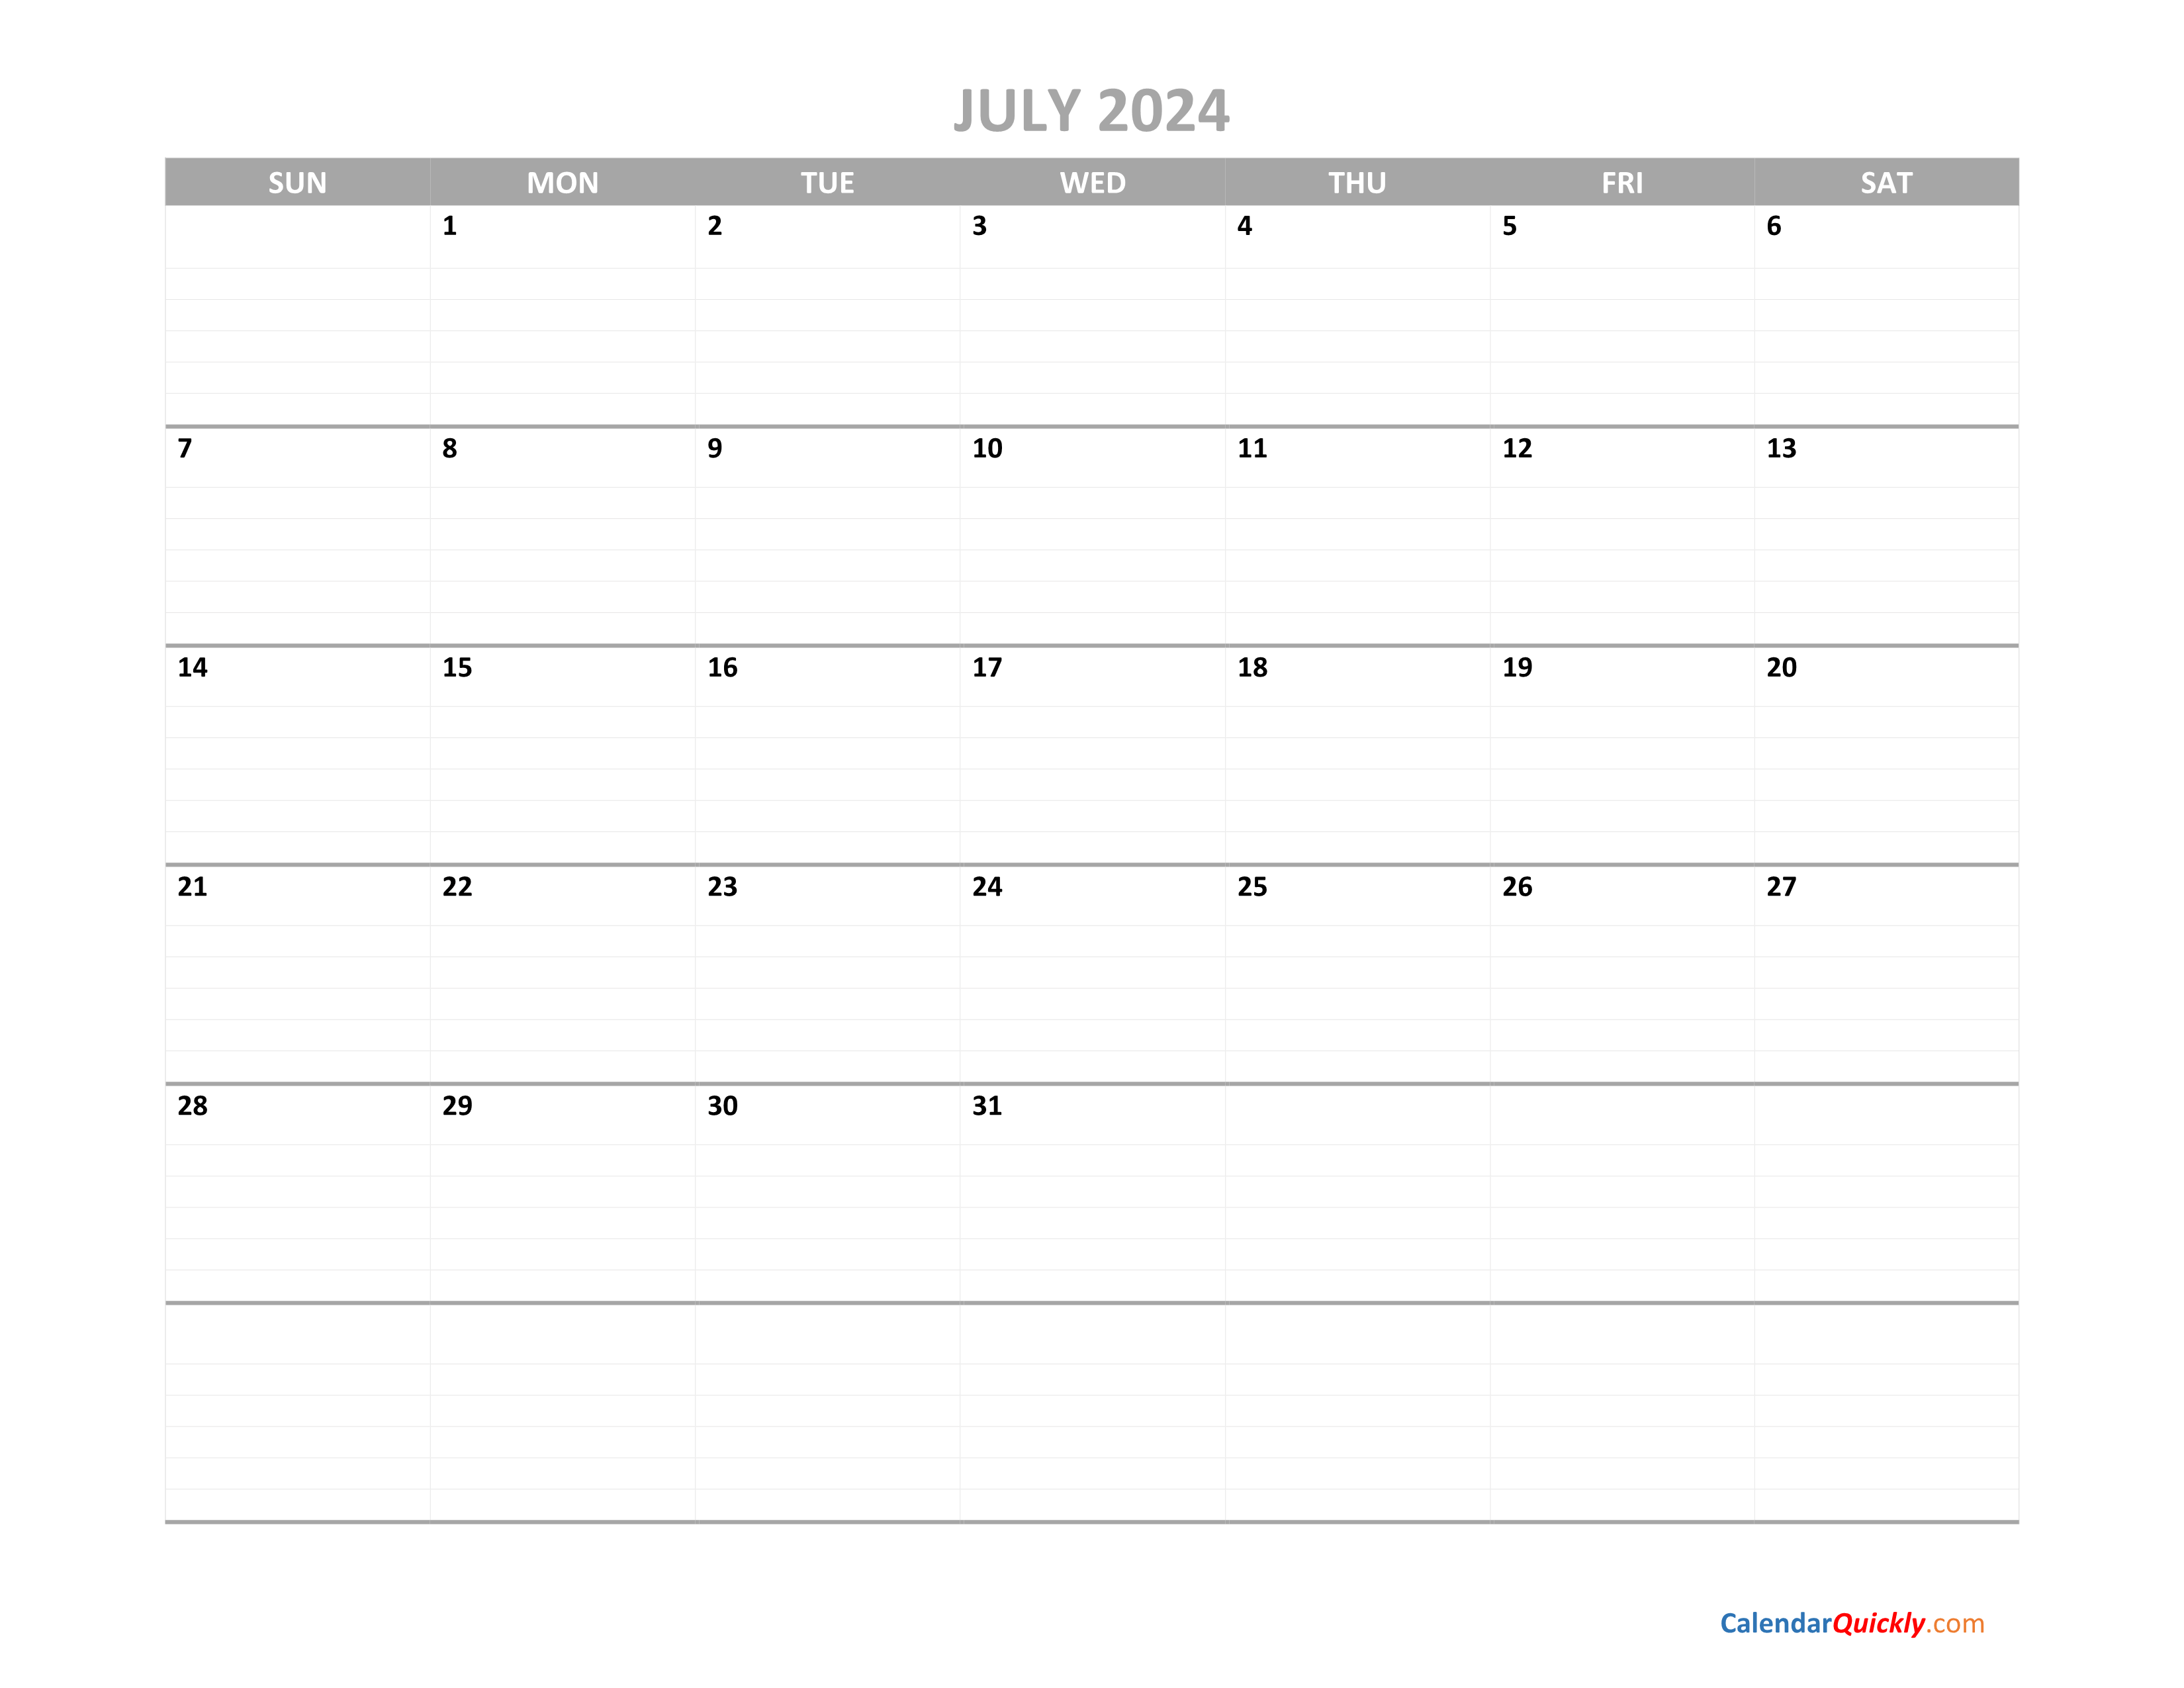 2024 Calendar July Month New Amazing Incredible January 2024 Calendar - Free Printable 2024 Calendar By Month July